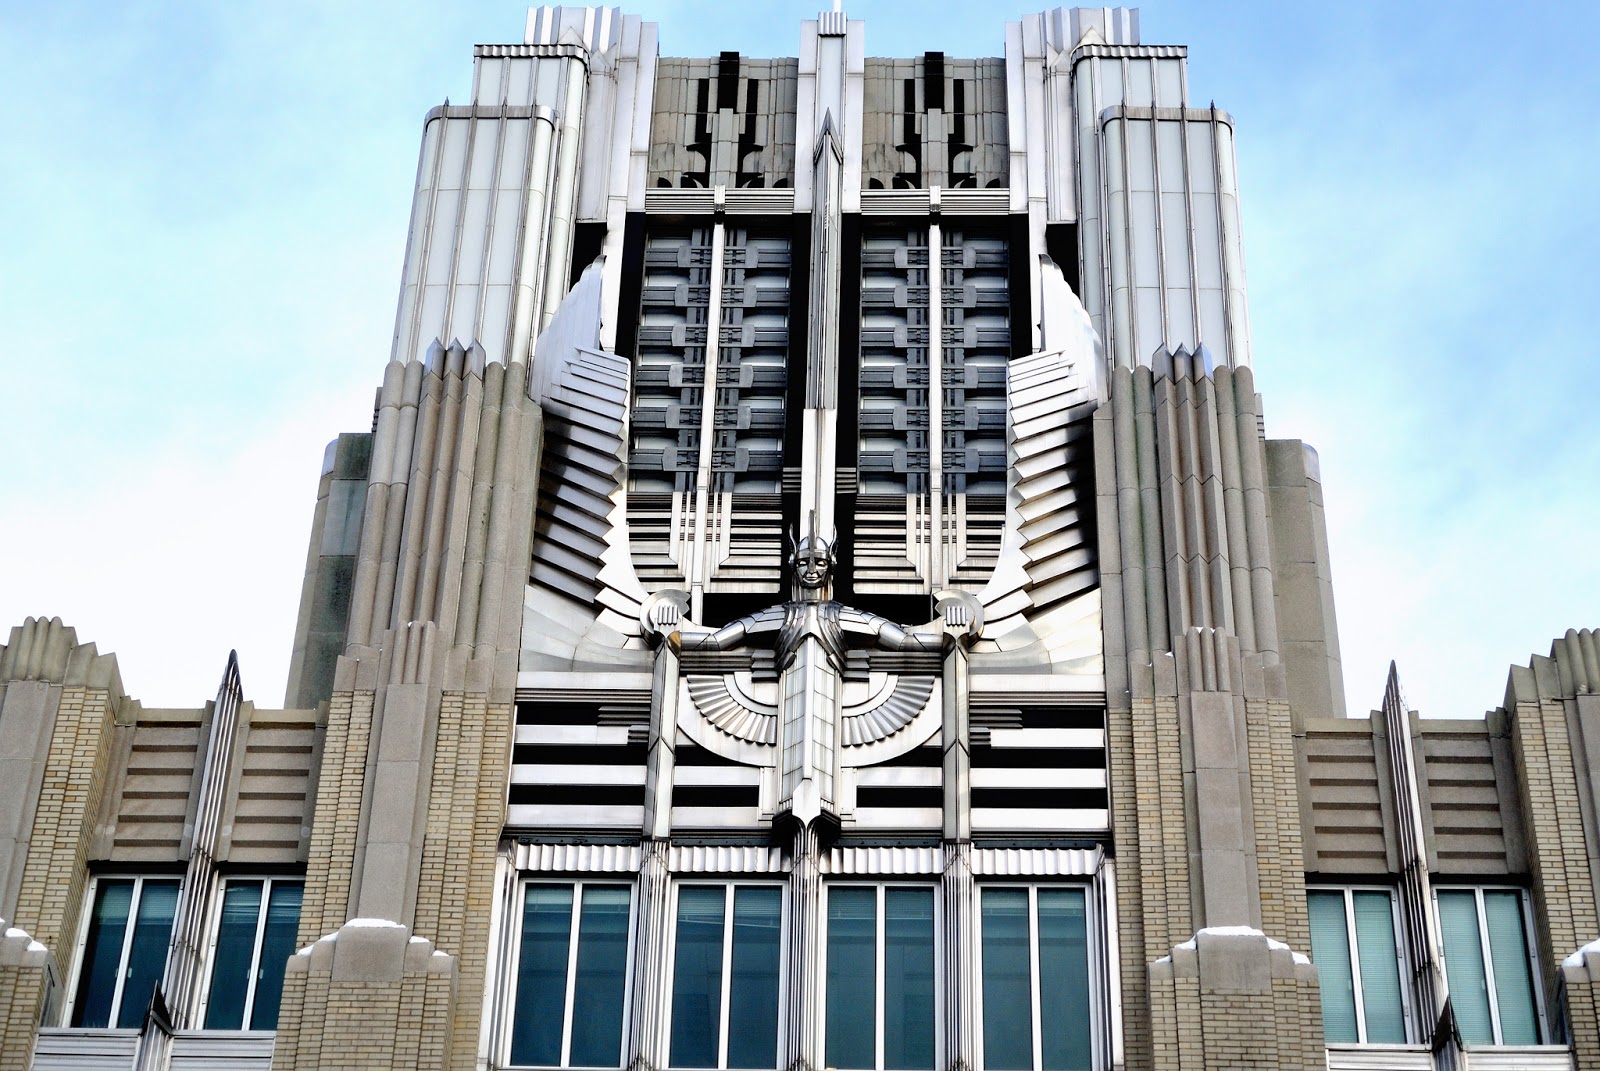 bloed eigendom Fysica The 10 Most Fascinating Art Deco Buildings You Need To Know - Arch2O.com